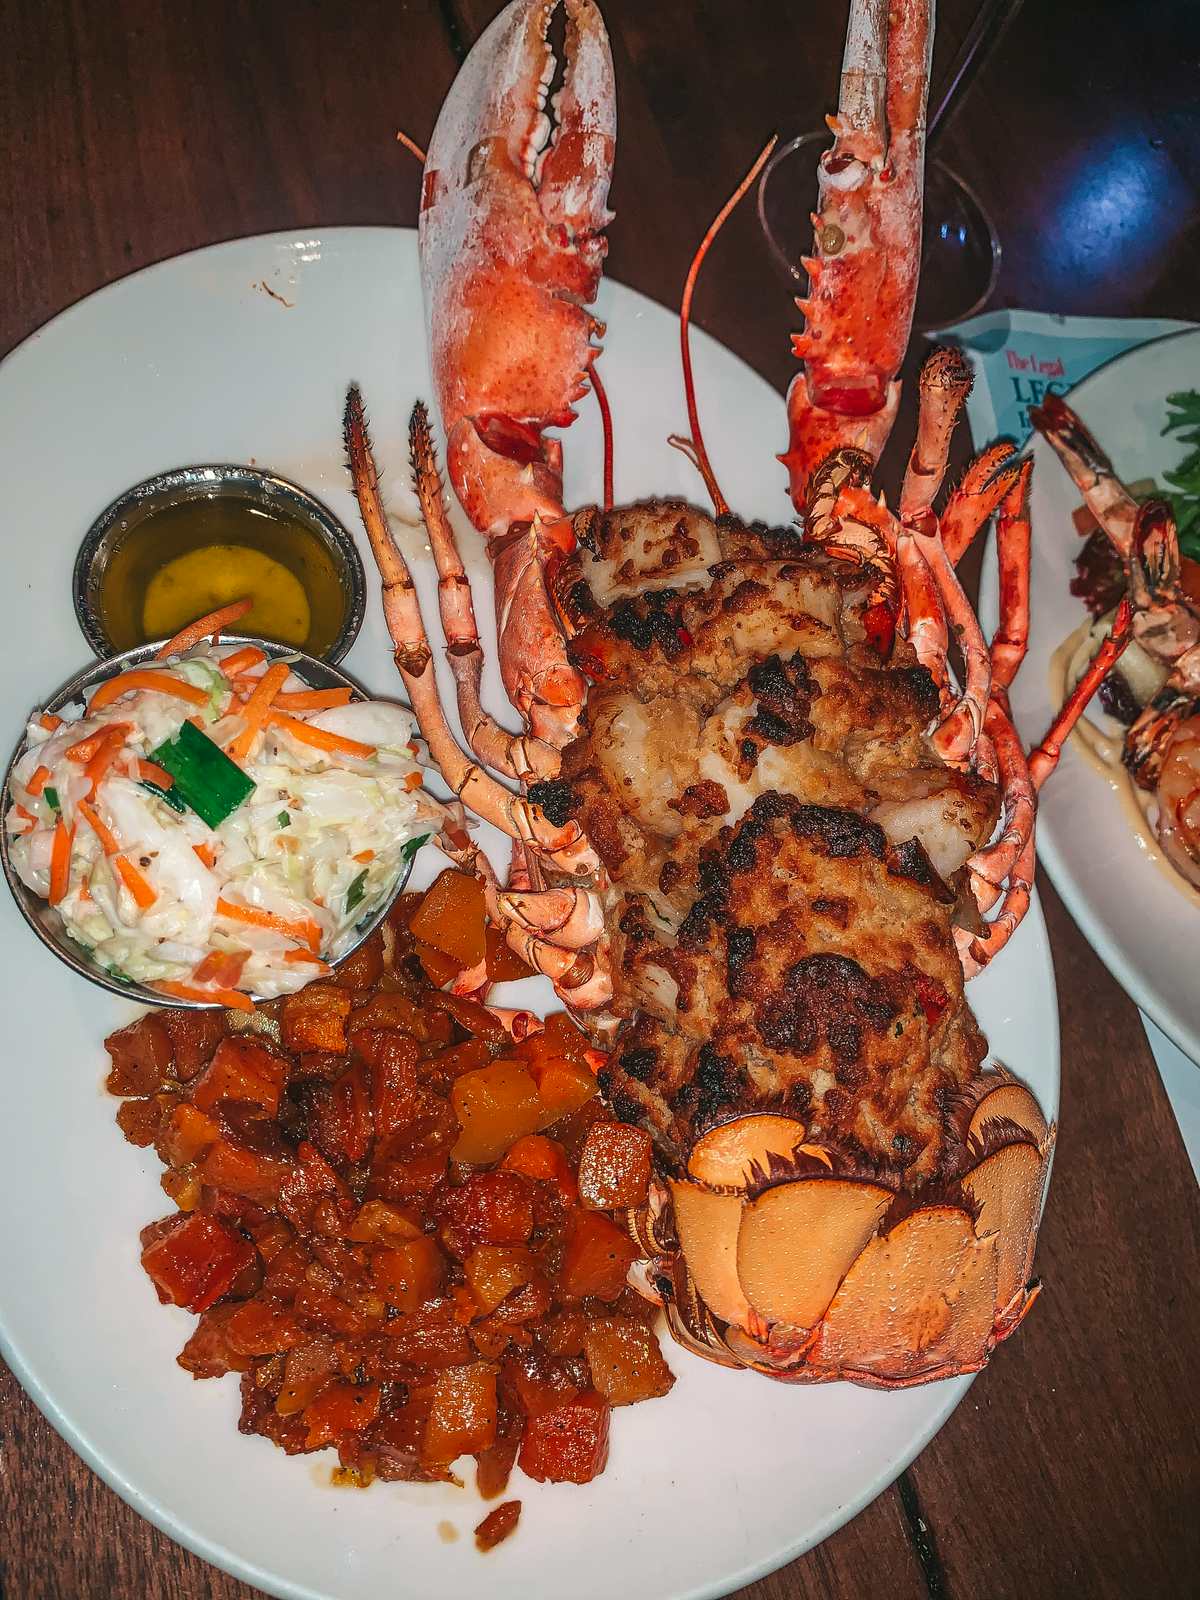 Stuffed whole lobster from Legal Sea Food in Boston